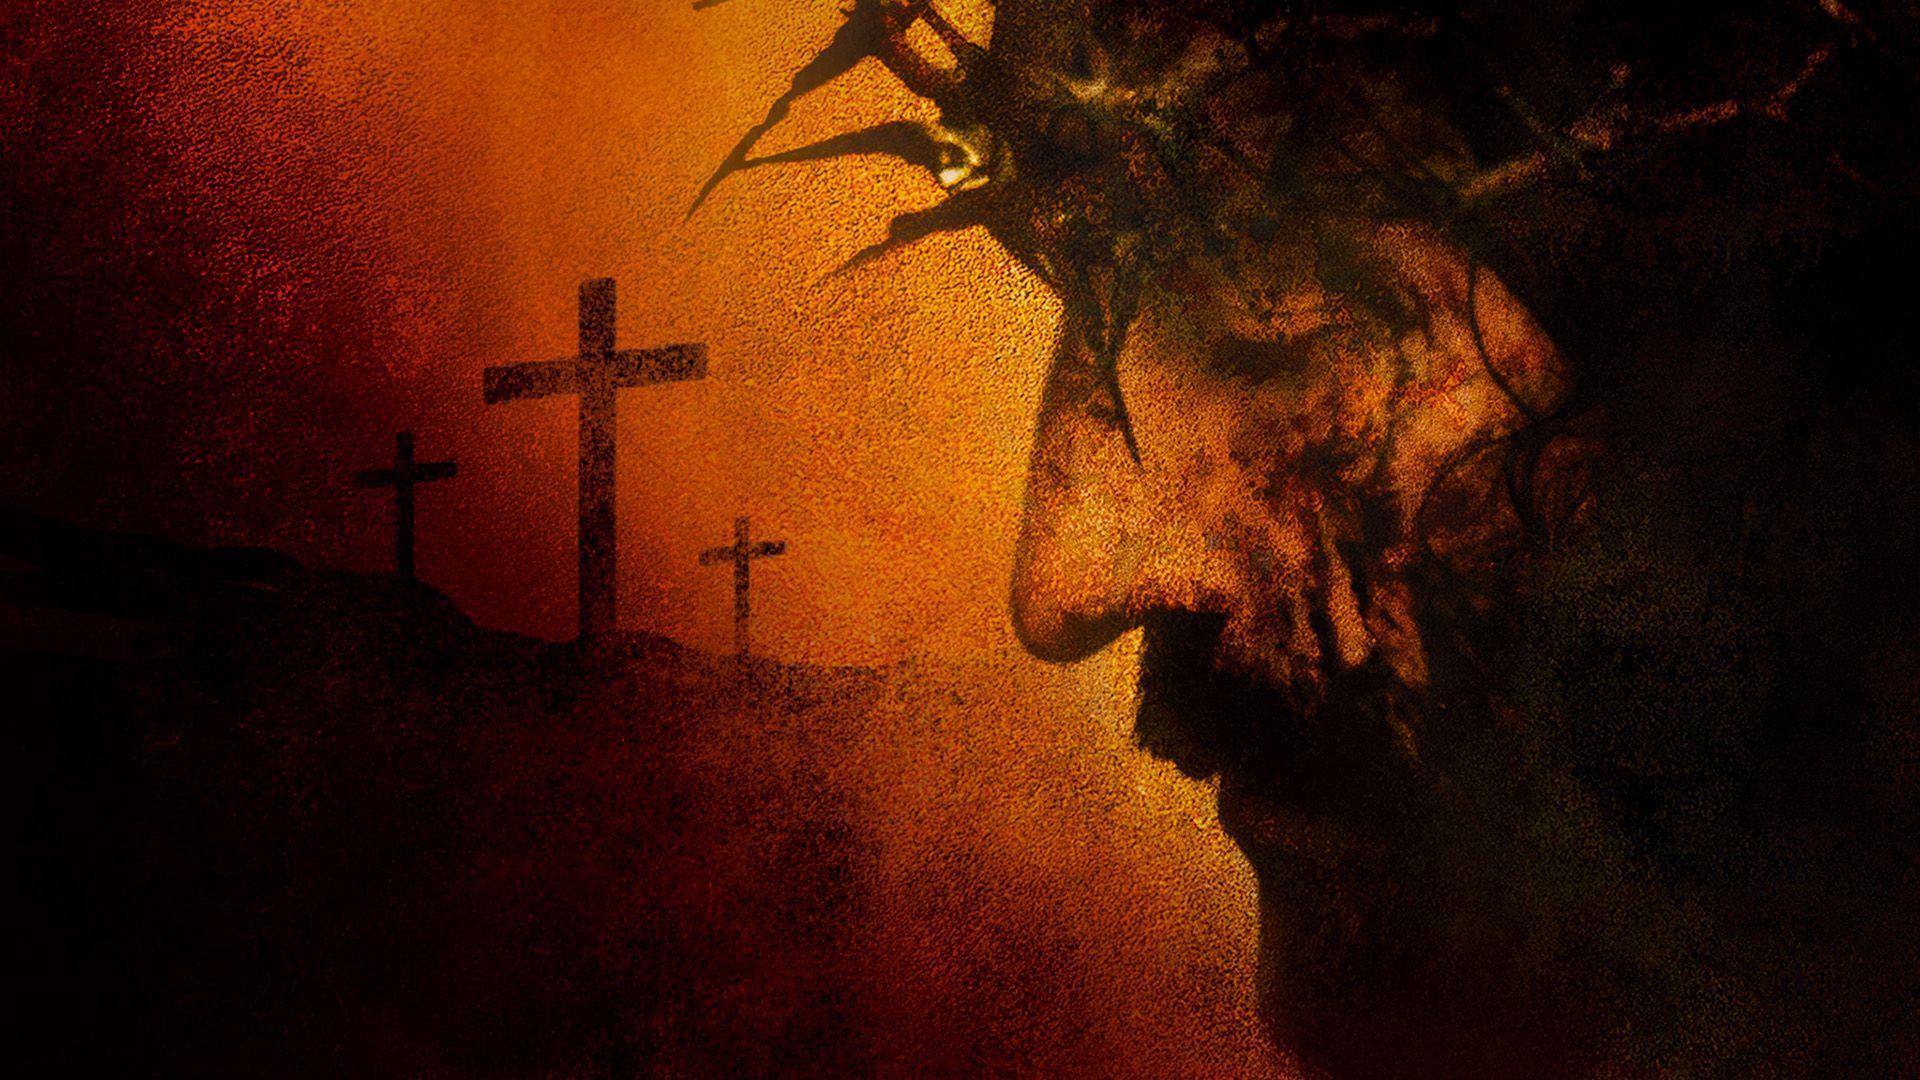 The Passion of the Christ Desktop Wallpaper Free The Passion of the Christ Desktop Background